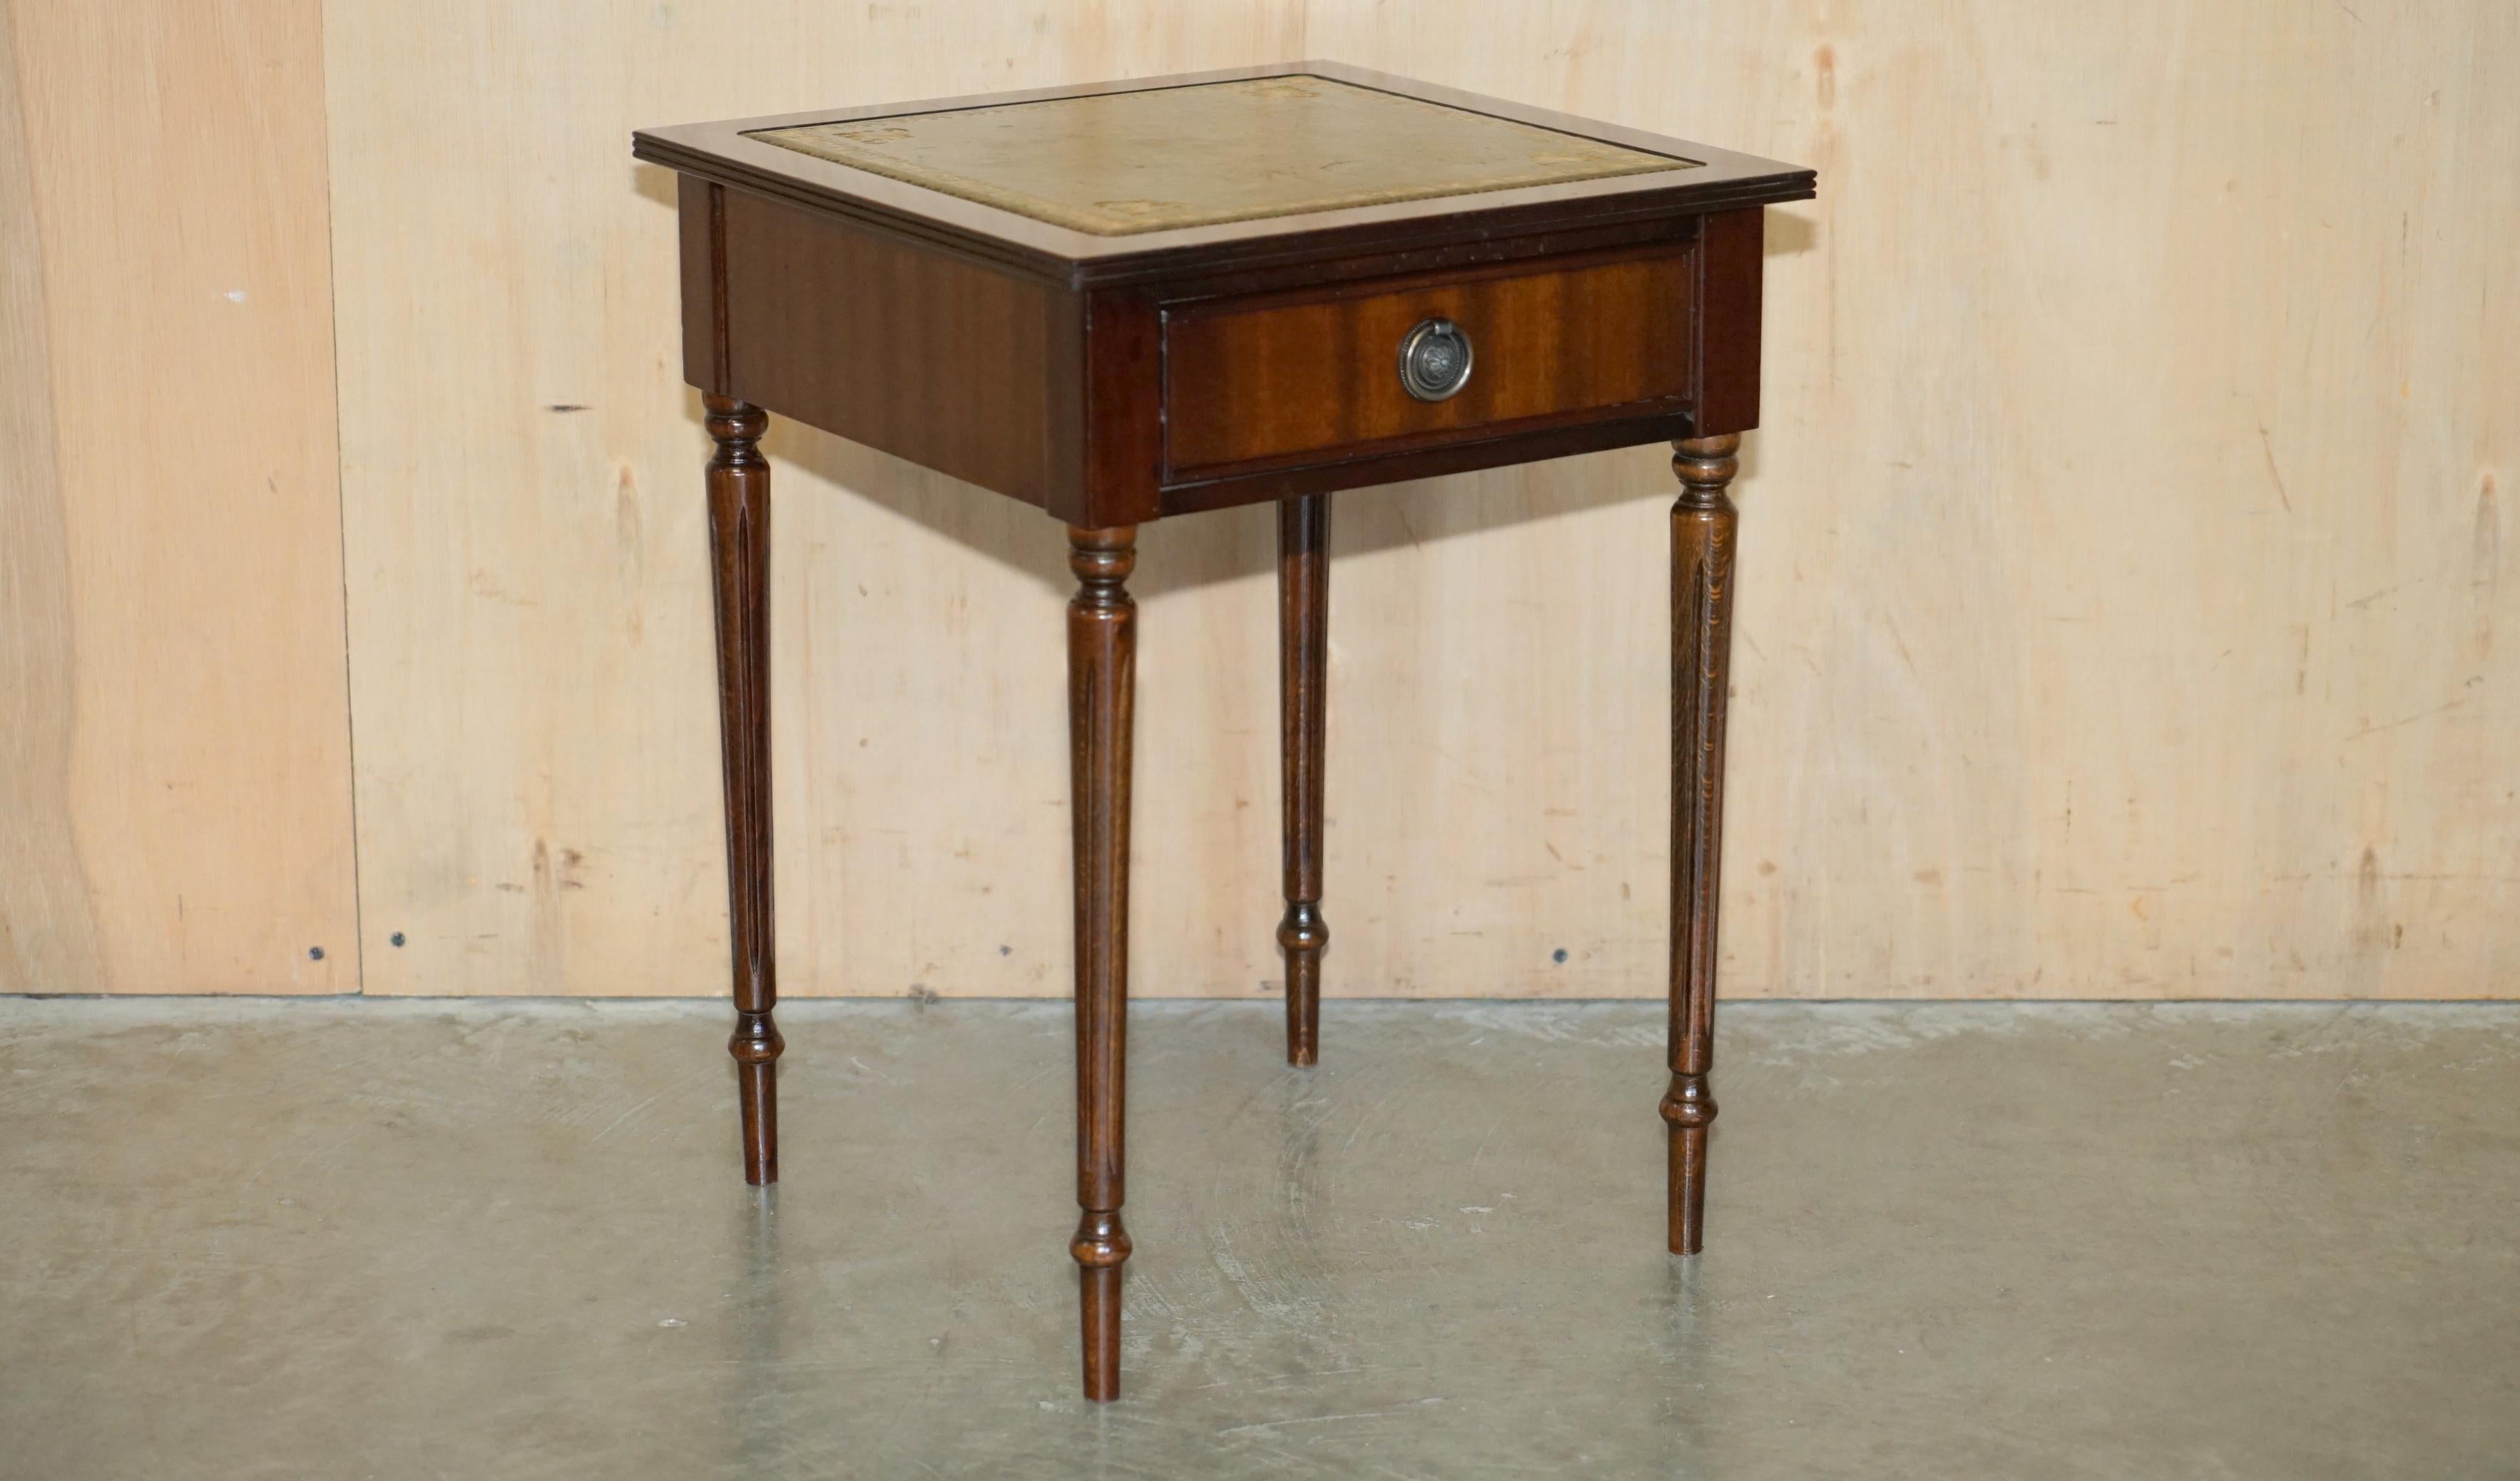 Royal House Antiques

Royal House Antiques is delighted to offer for sale this lovely vintage circa 1940's hand made in England side table with British Racing green, gold leaf embossed top and large single drawer

Please note the delivery fee listed